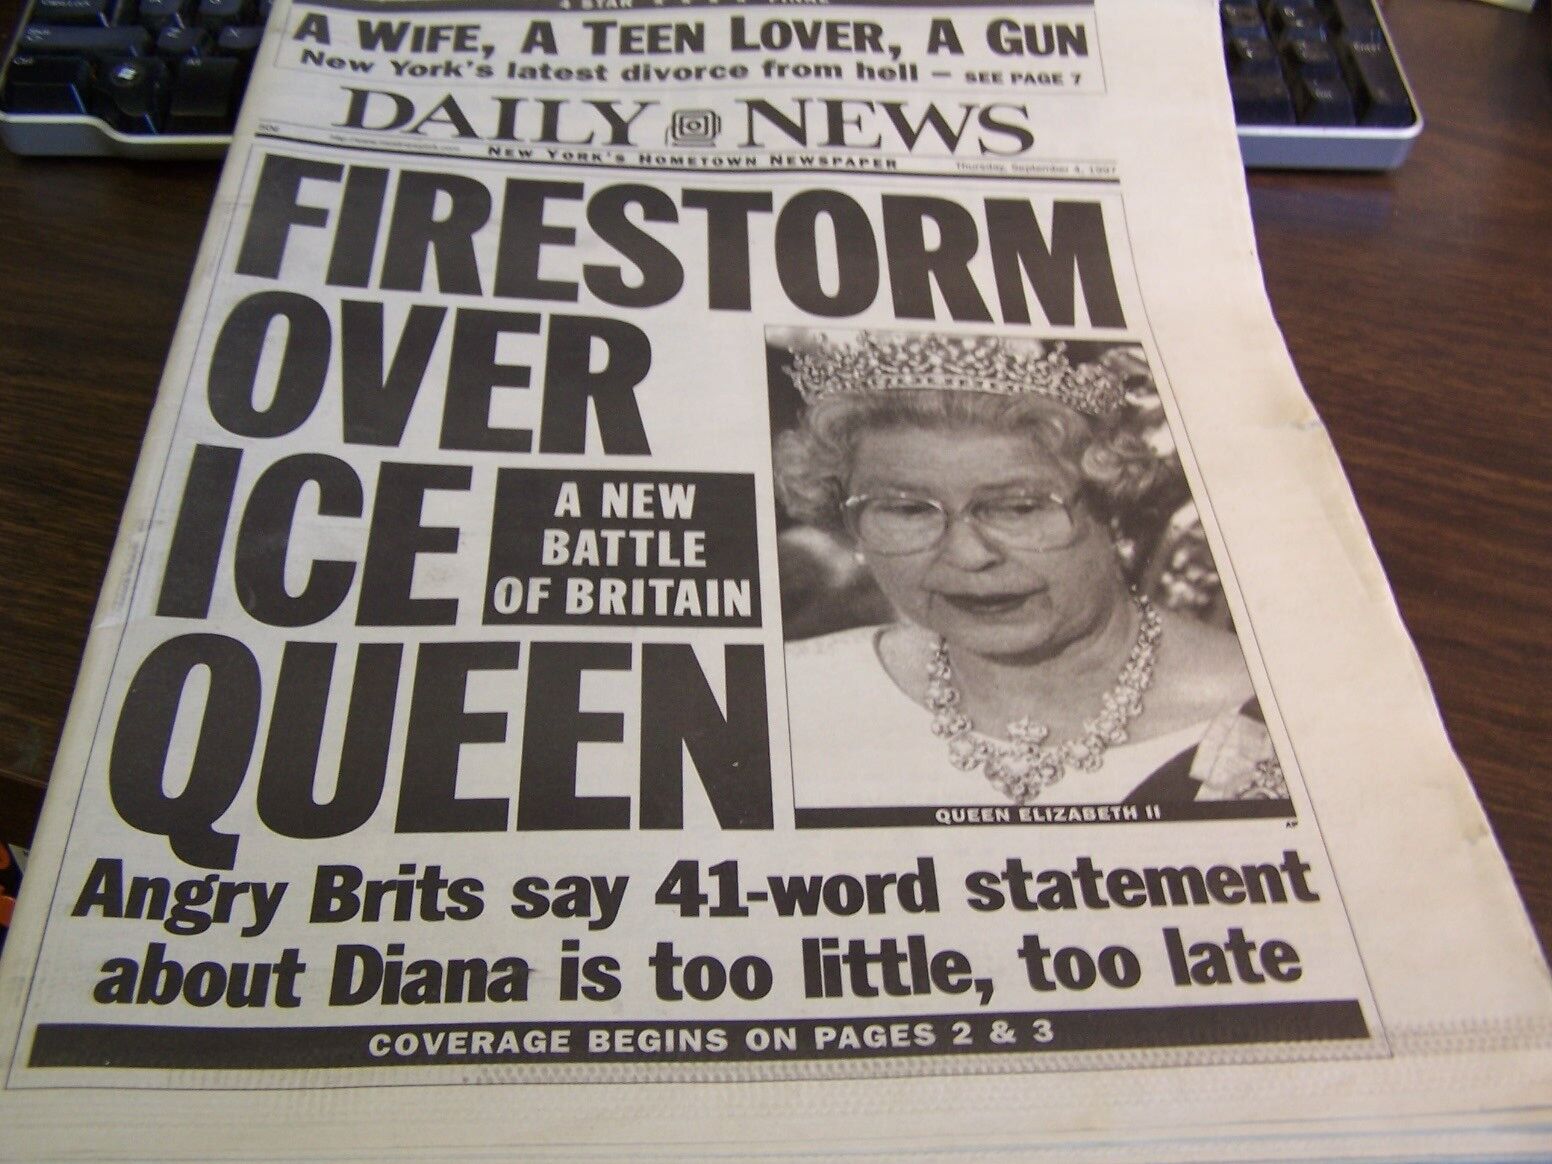 NEW YORK DAILY NEWS - 9/4/97 - FIRESTORM OVER ICE QUEEN - PRINCESS DIANA FUNERAL